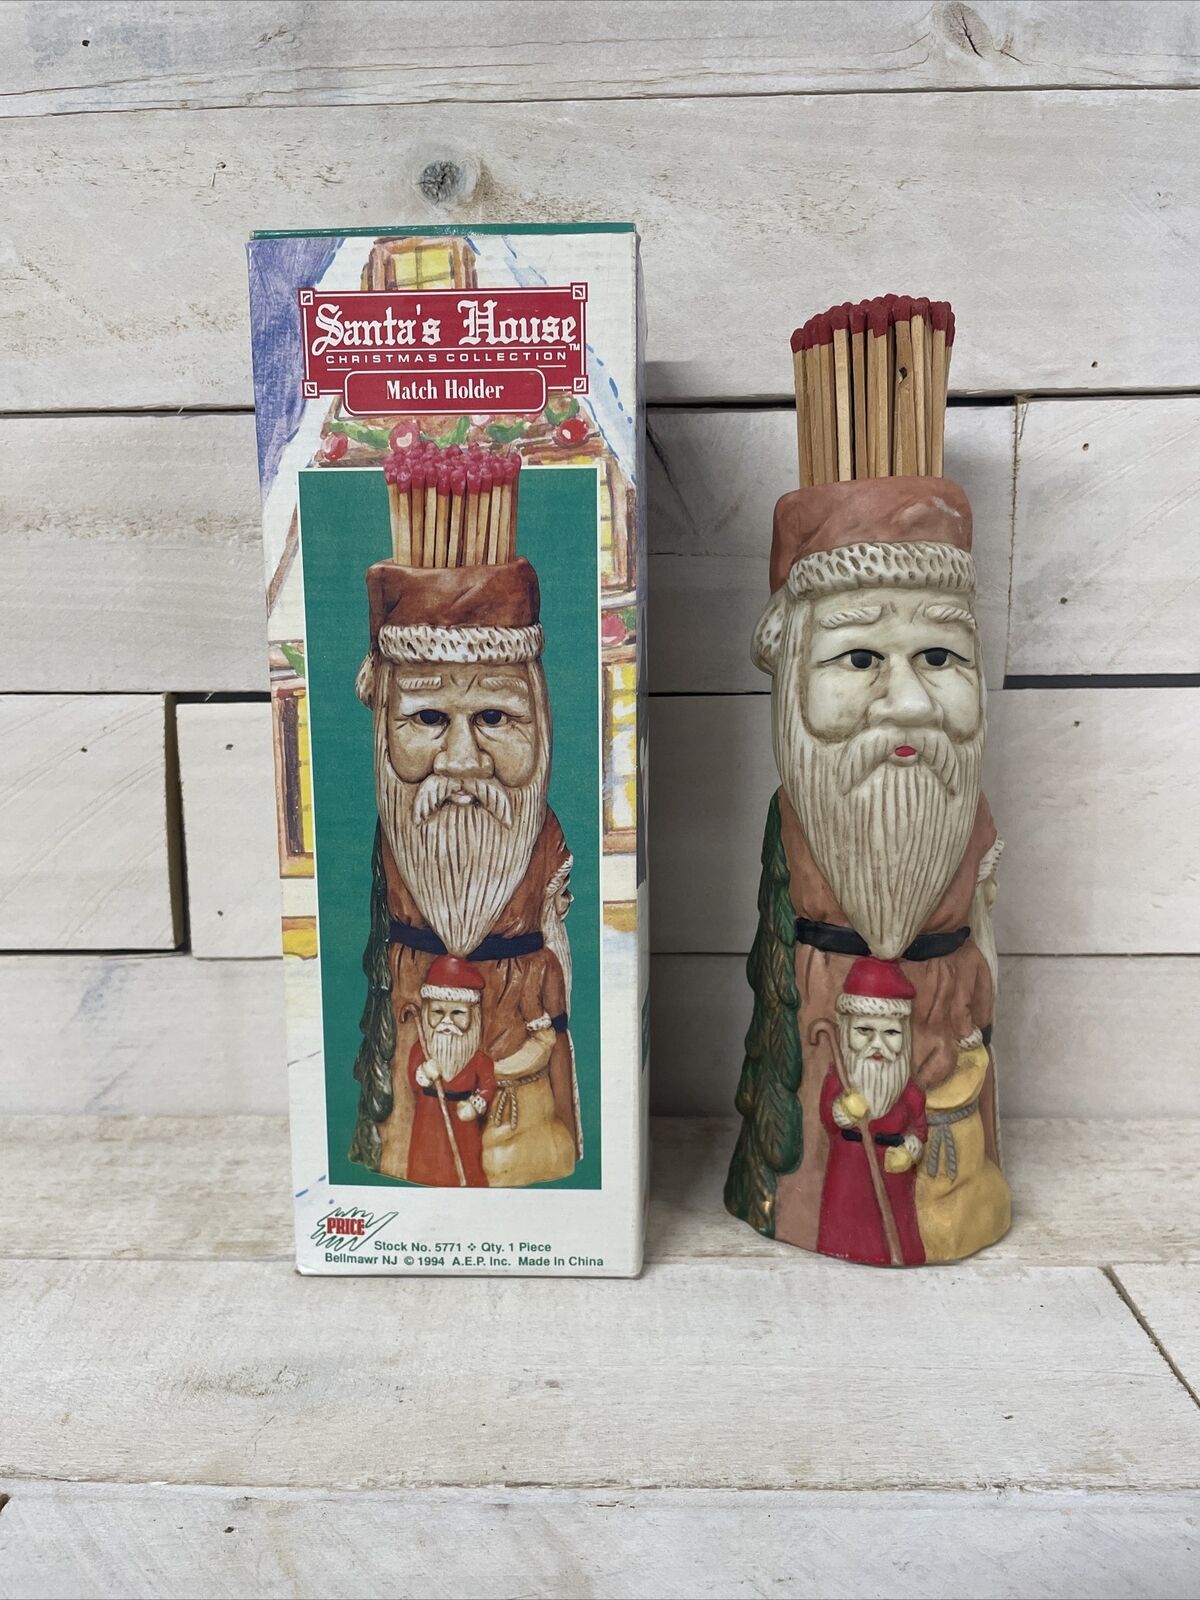 Vintage Price Santas House Christmas Collection Match Holder w/ Matches